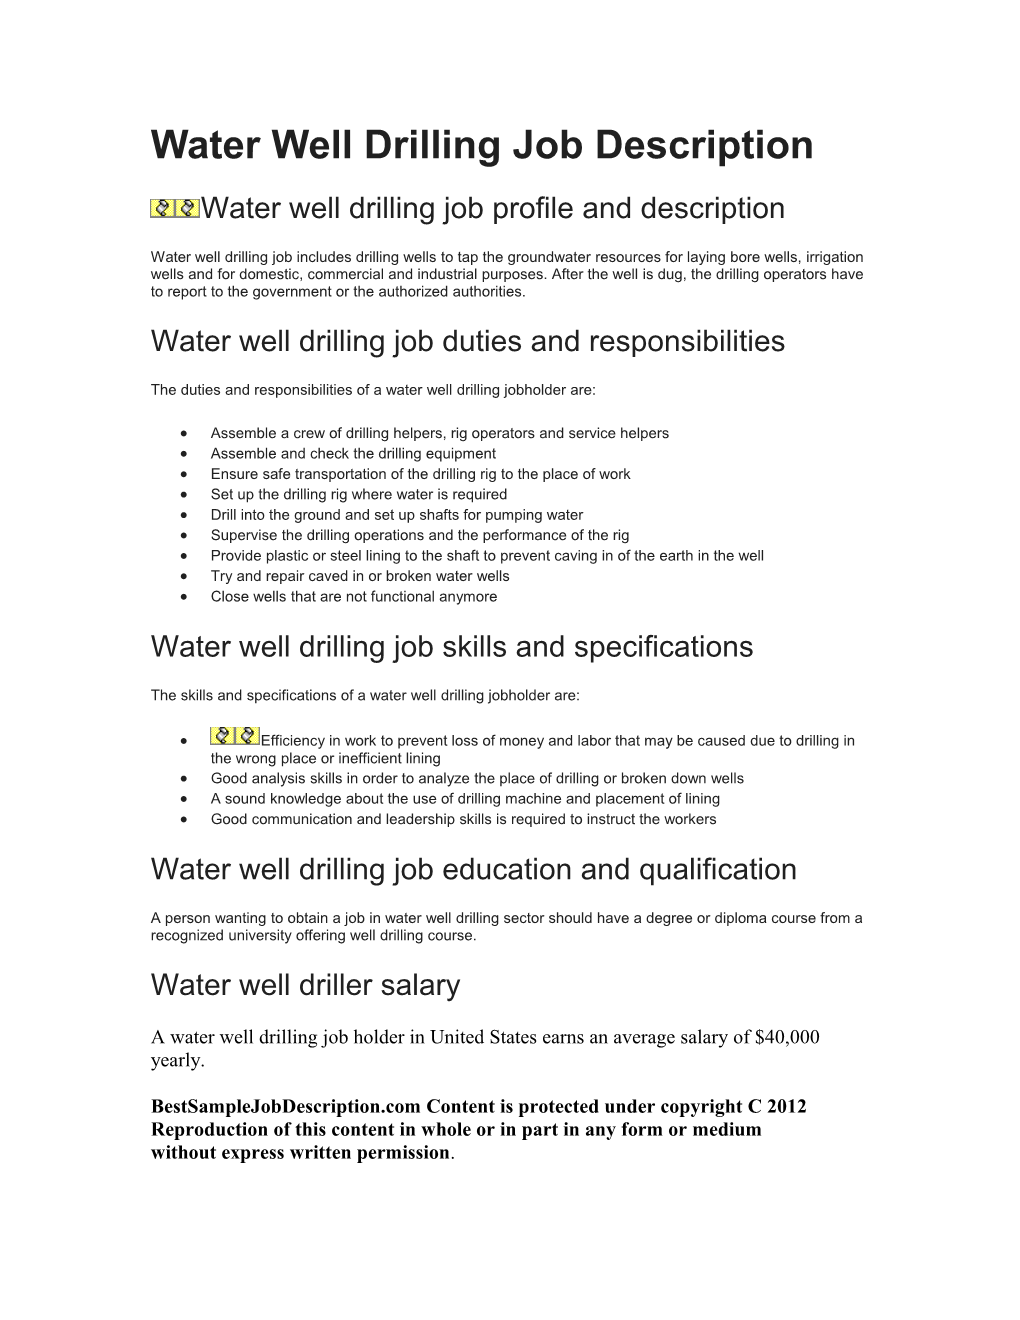 Water Well Drilling Job Profile and Description